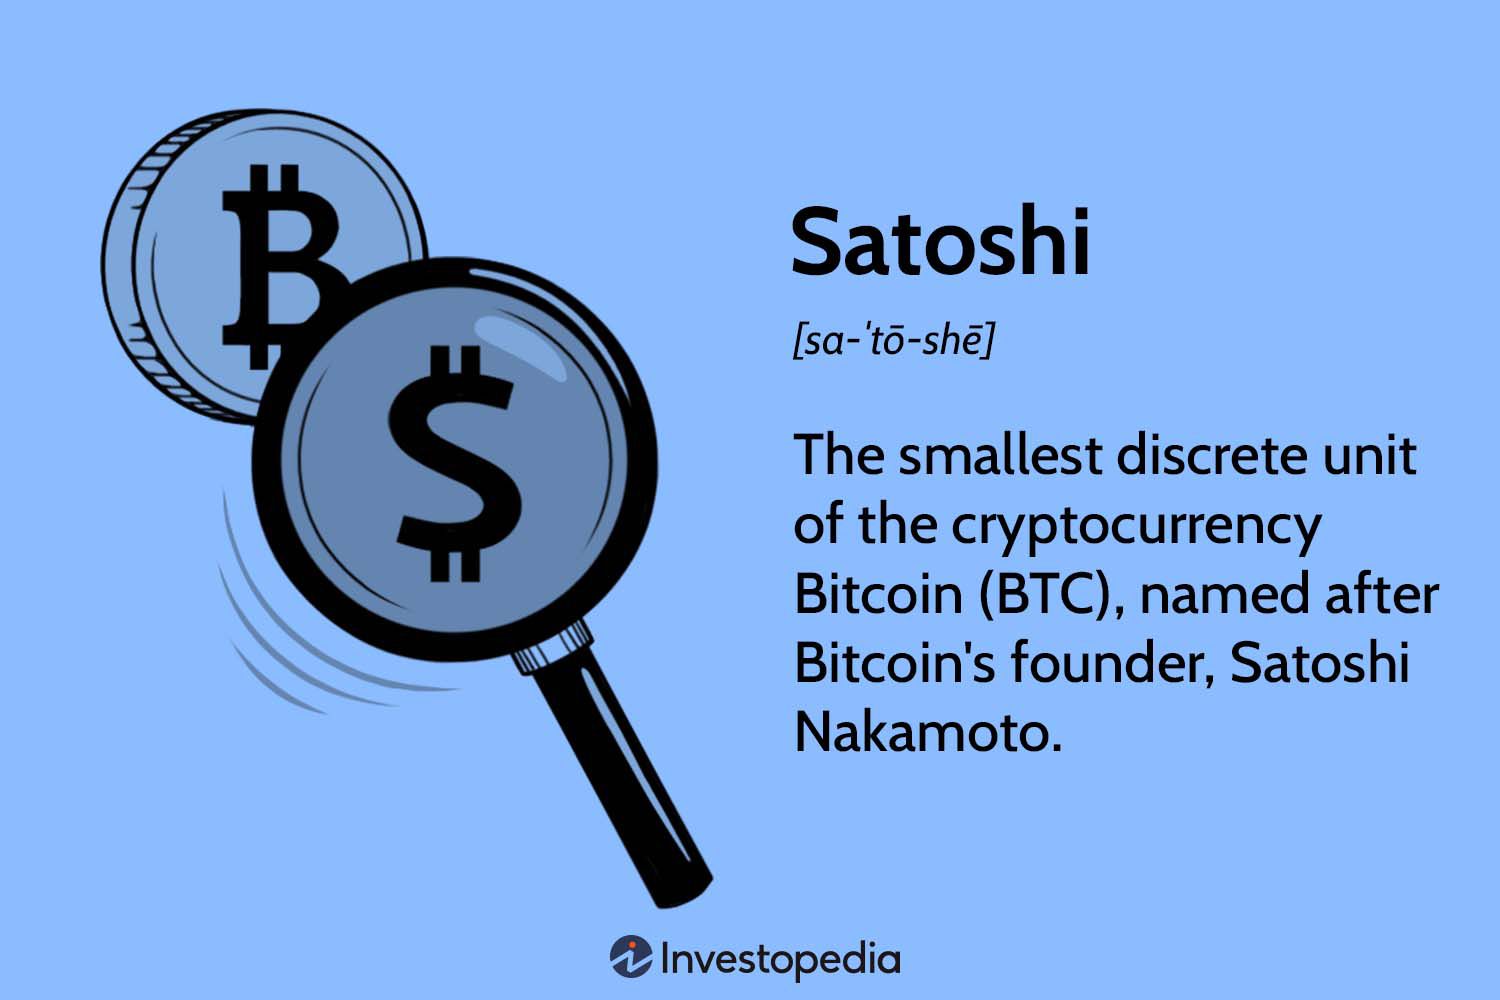 Satoshi Nakamoto's Net Worth - How Rich is the Inventor of Bitcoin?